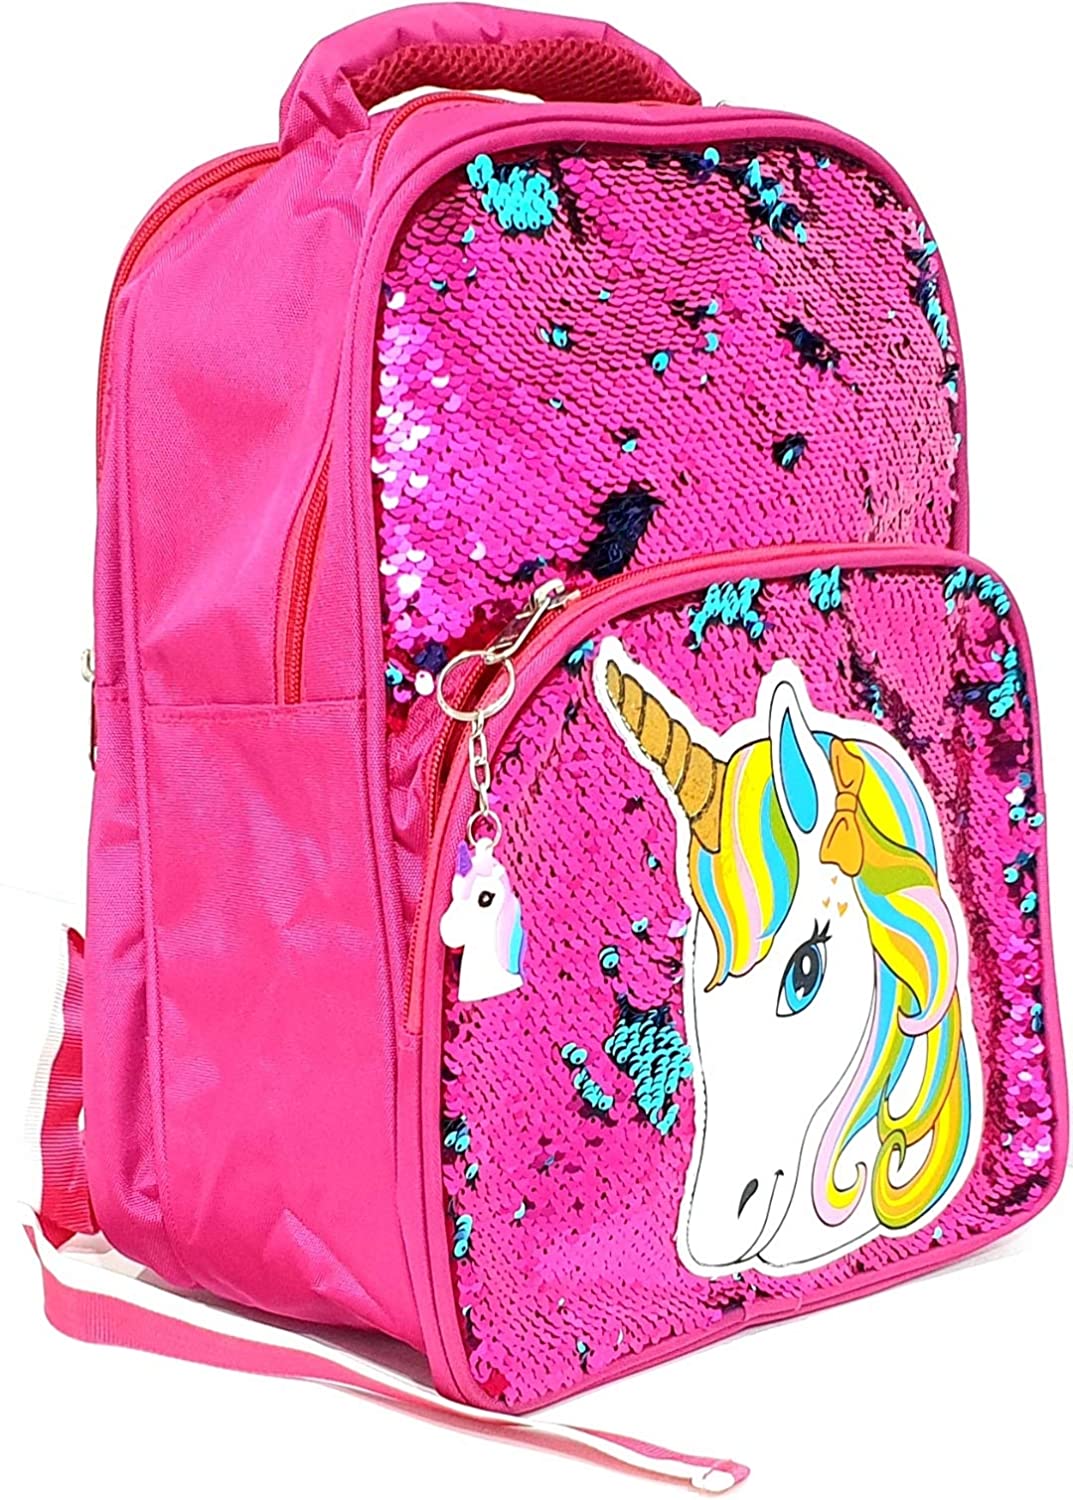 Unicorn School Bag | Buy Latest Premium Collections Up to 70% Off